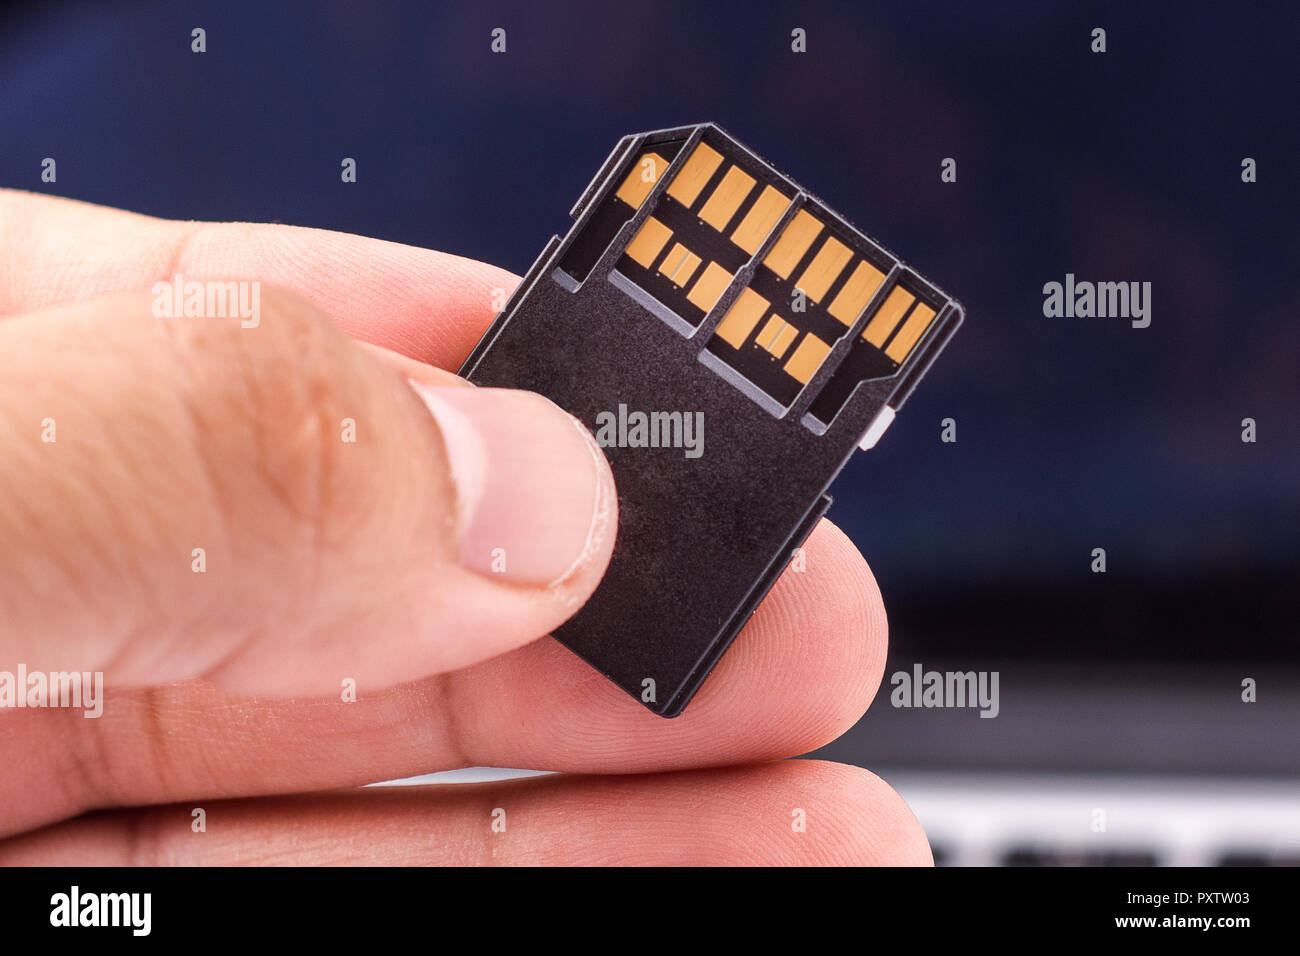 Fast SD memory card holding by fingers Stock Photo